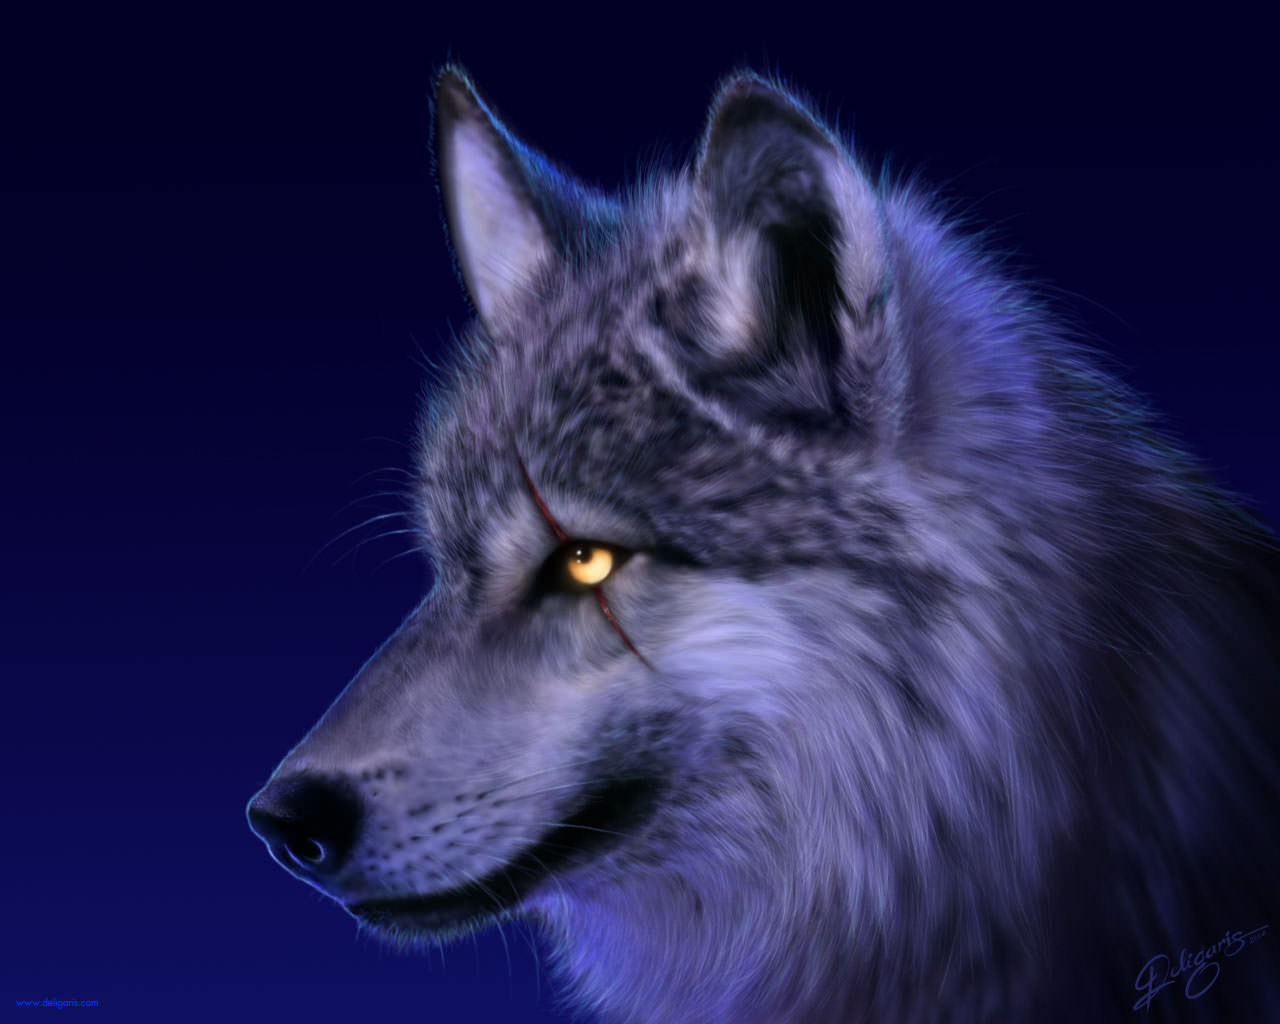 angry face of wolf image